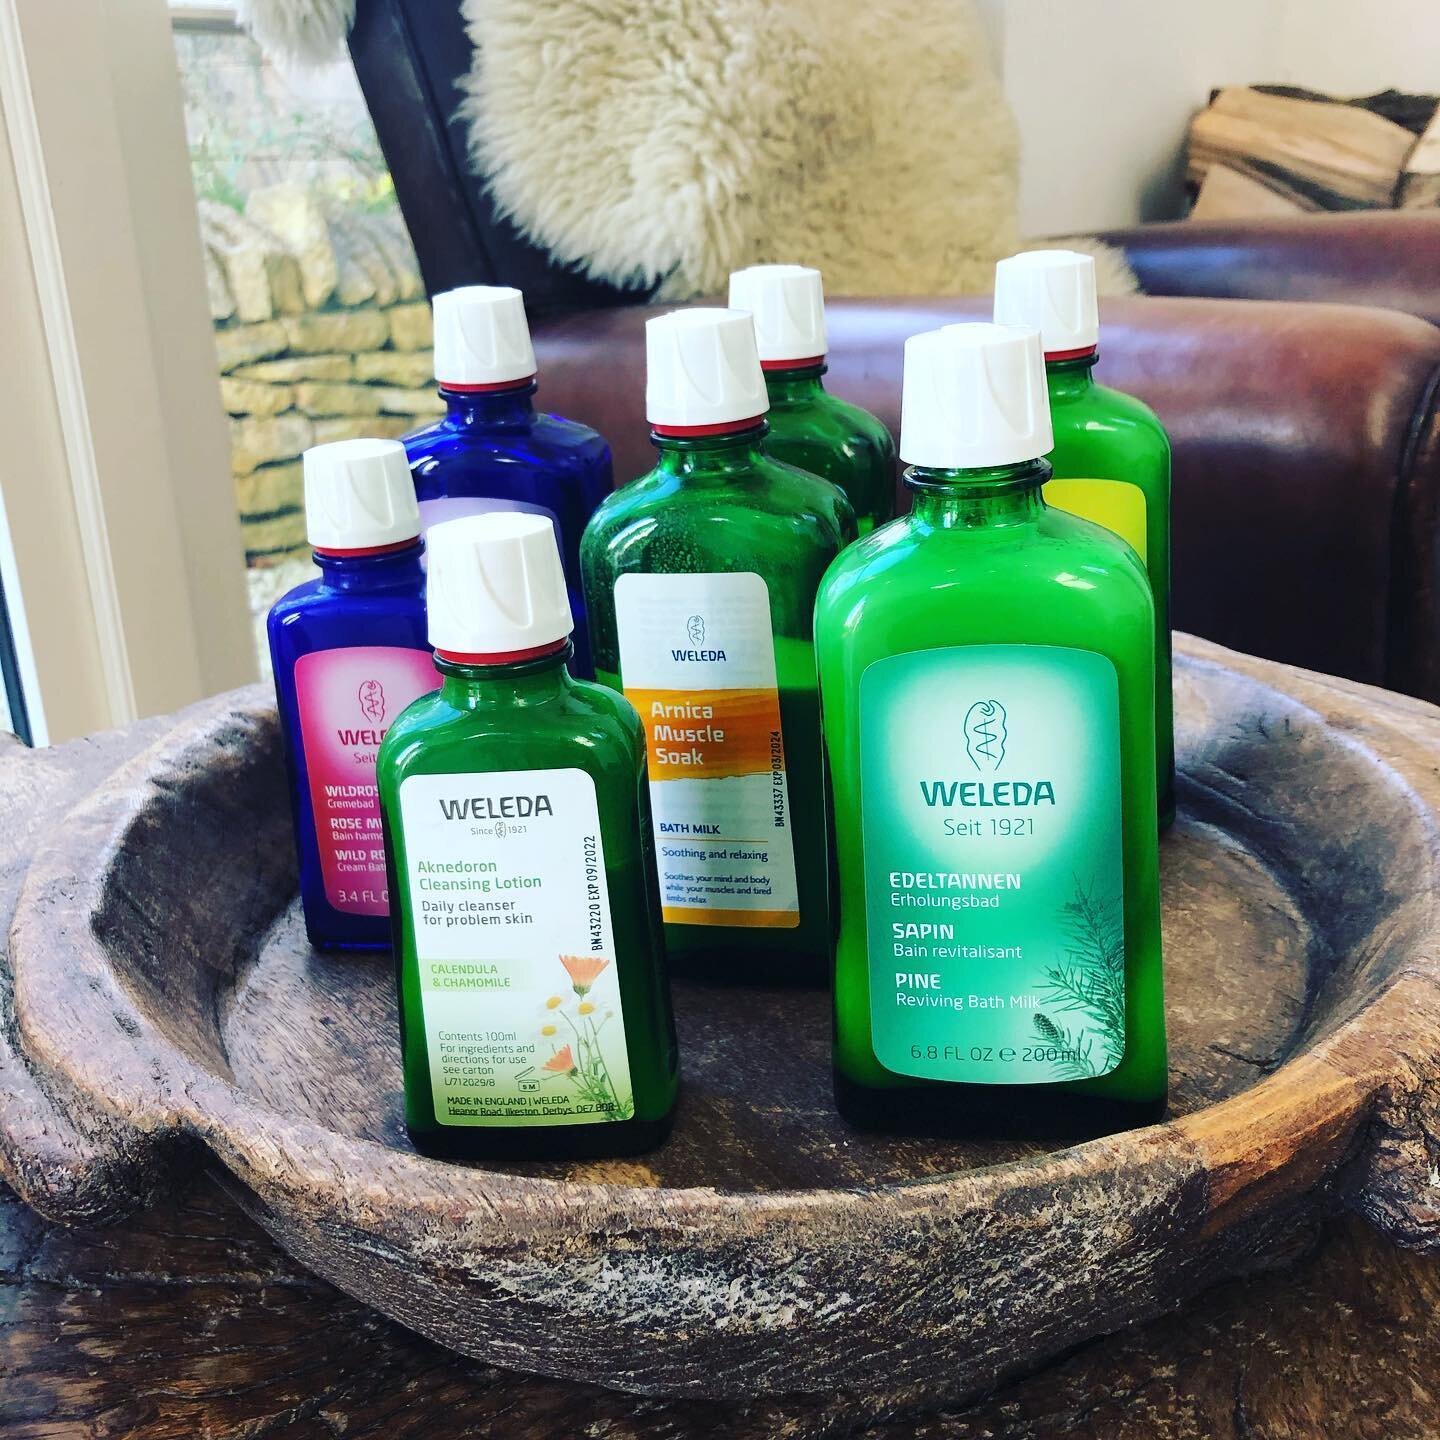 20% off Weleda&rsquo;s Facial Skincare today and all of this weekend - Our Aknedoron Cleansing Milk essential as a Cleanser or Hand soak, Footbath, Spray the room and even make your own facial wipes - antibacterial properties of thyme and uplifting g